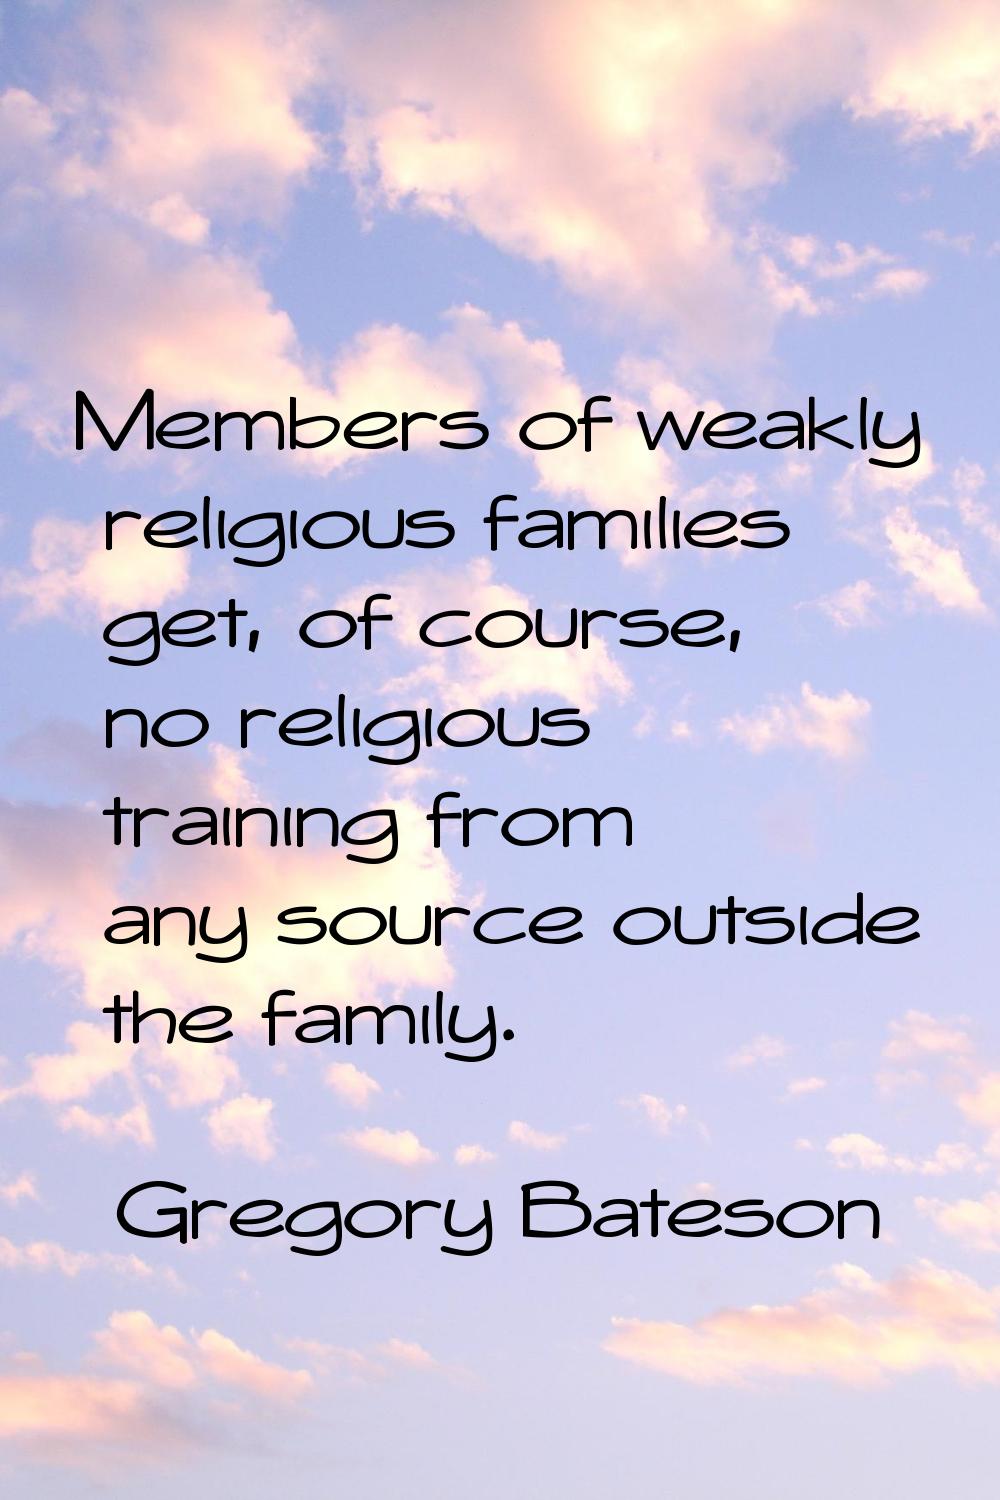 Members of weakly religious families get, of course, no religious training from any source outside 